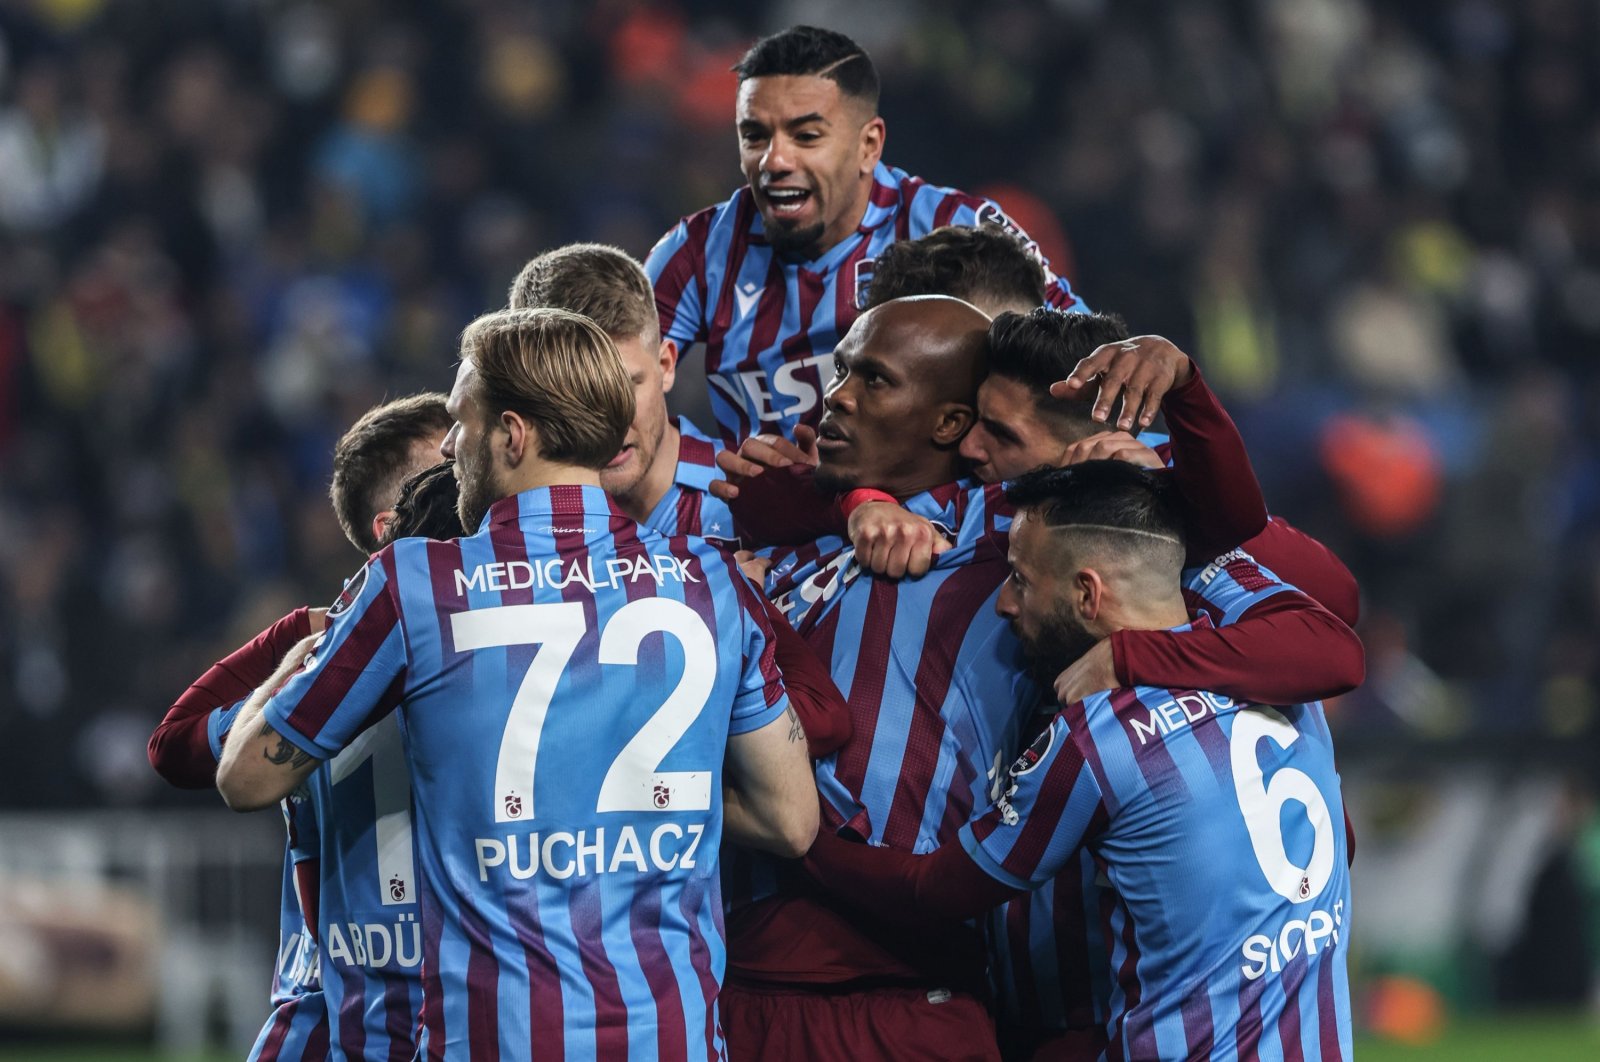 Trabzonspor players celebrate a goal against Rizespor, March 18, 2022. (DHA Photo)